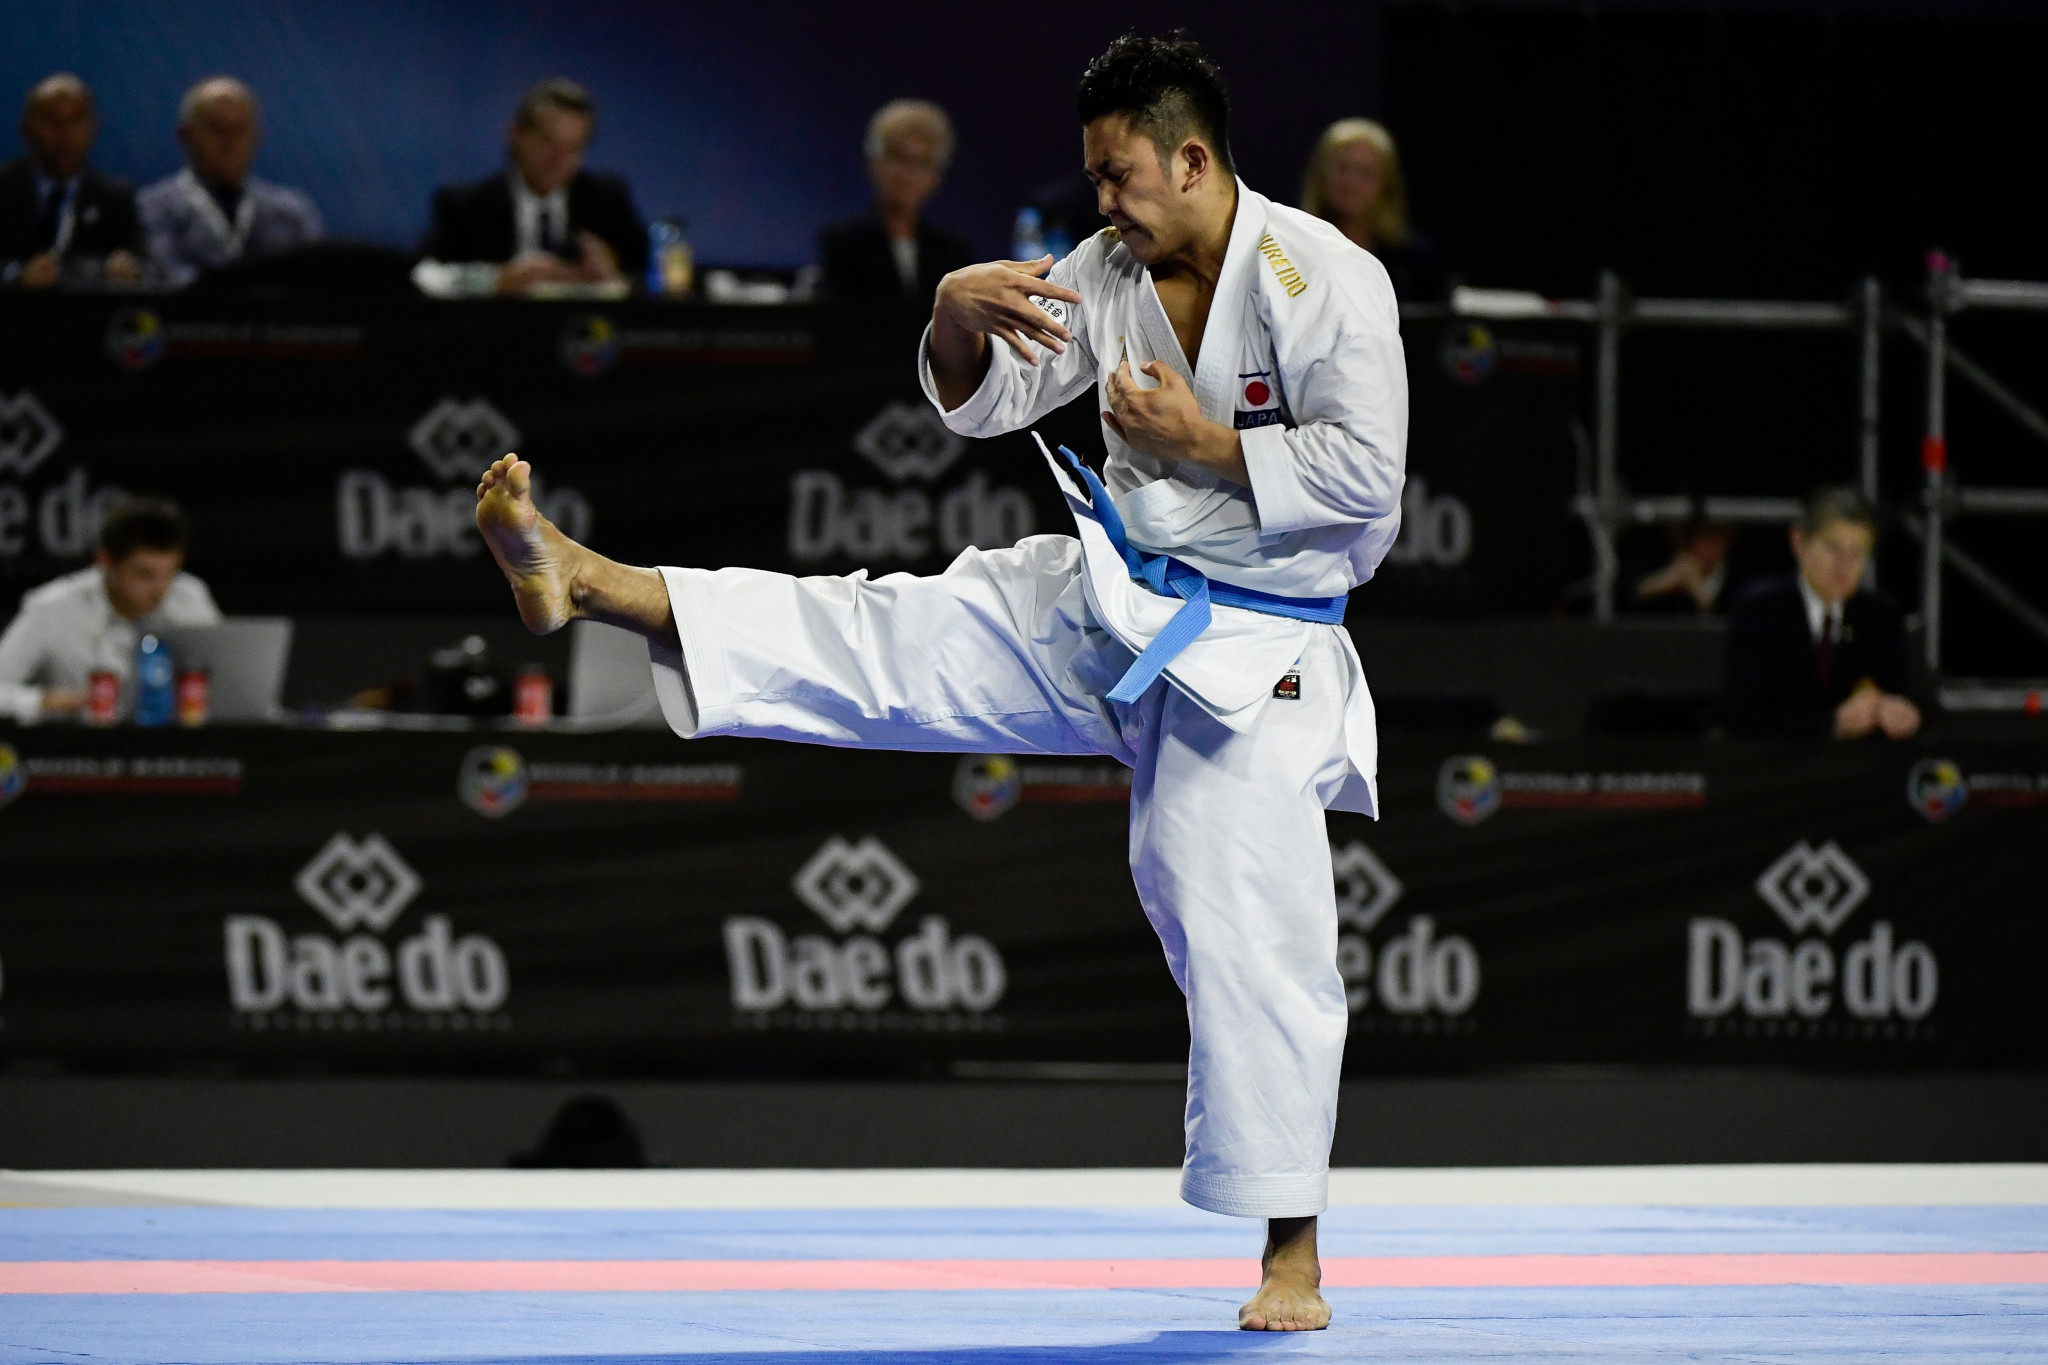 Ryo Kiyuna demonstrated his class once against as he claimed a third straight men's kata title ©Getty Images